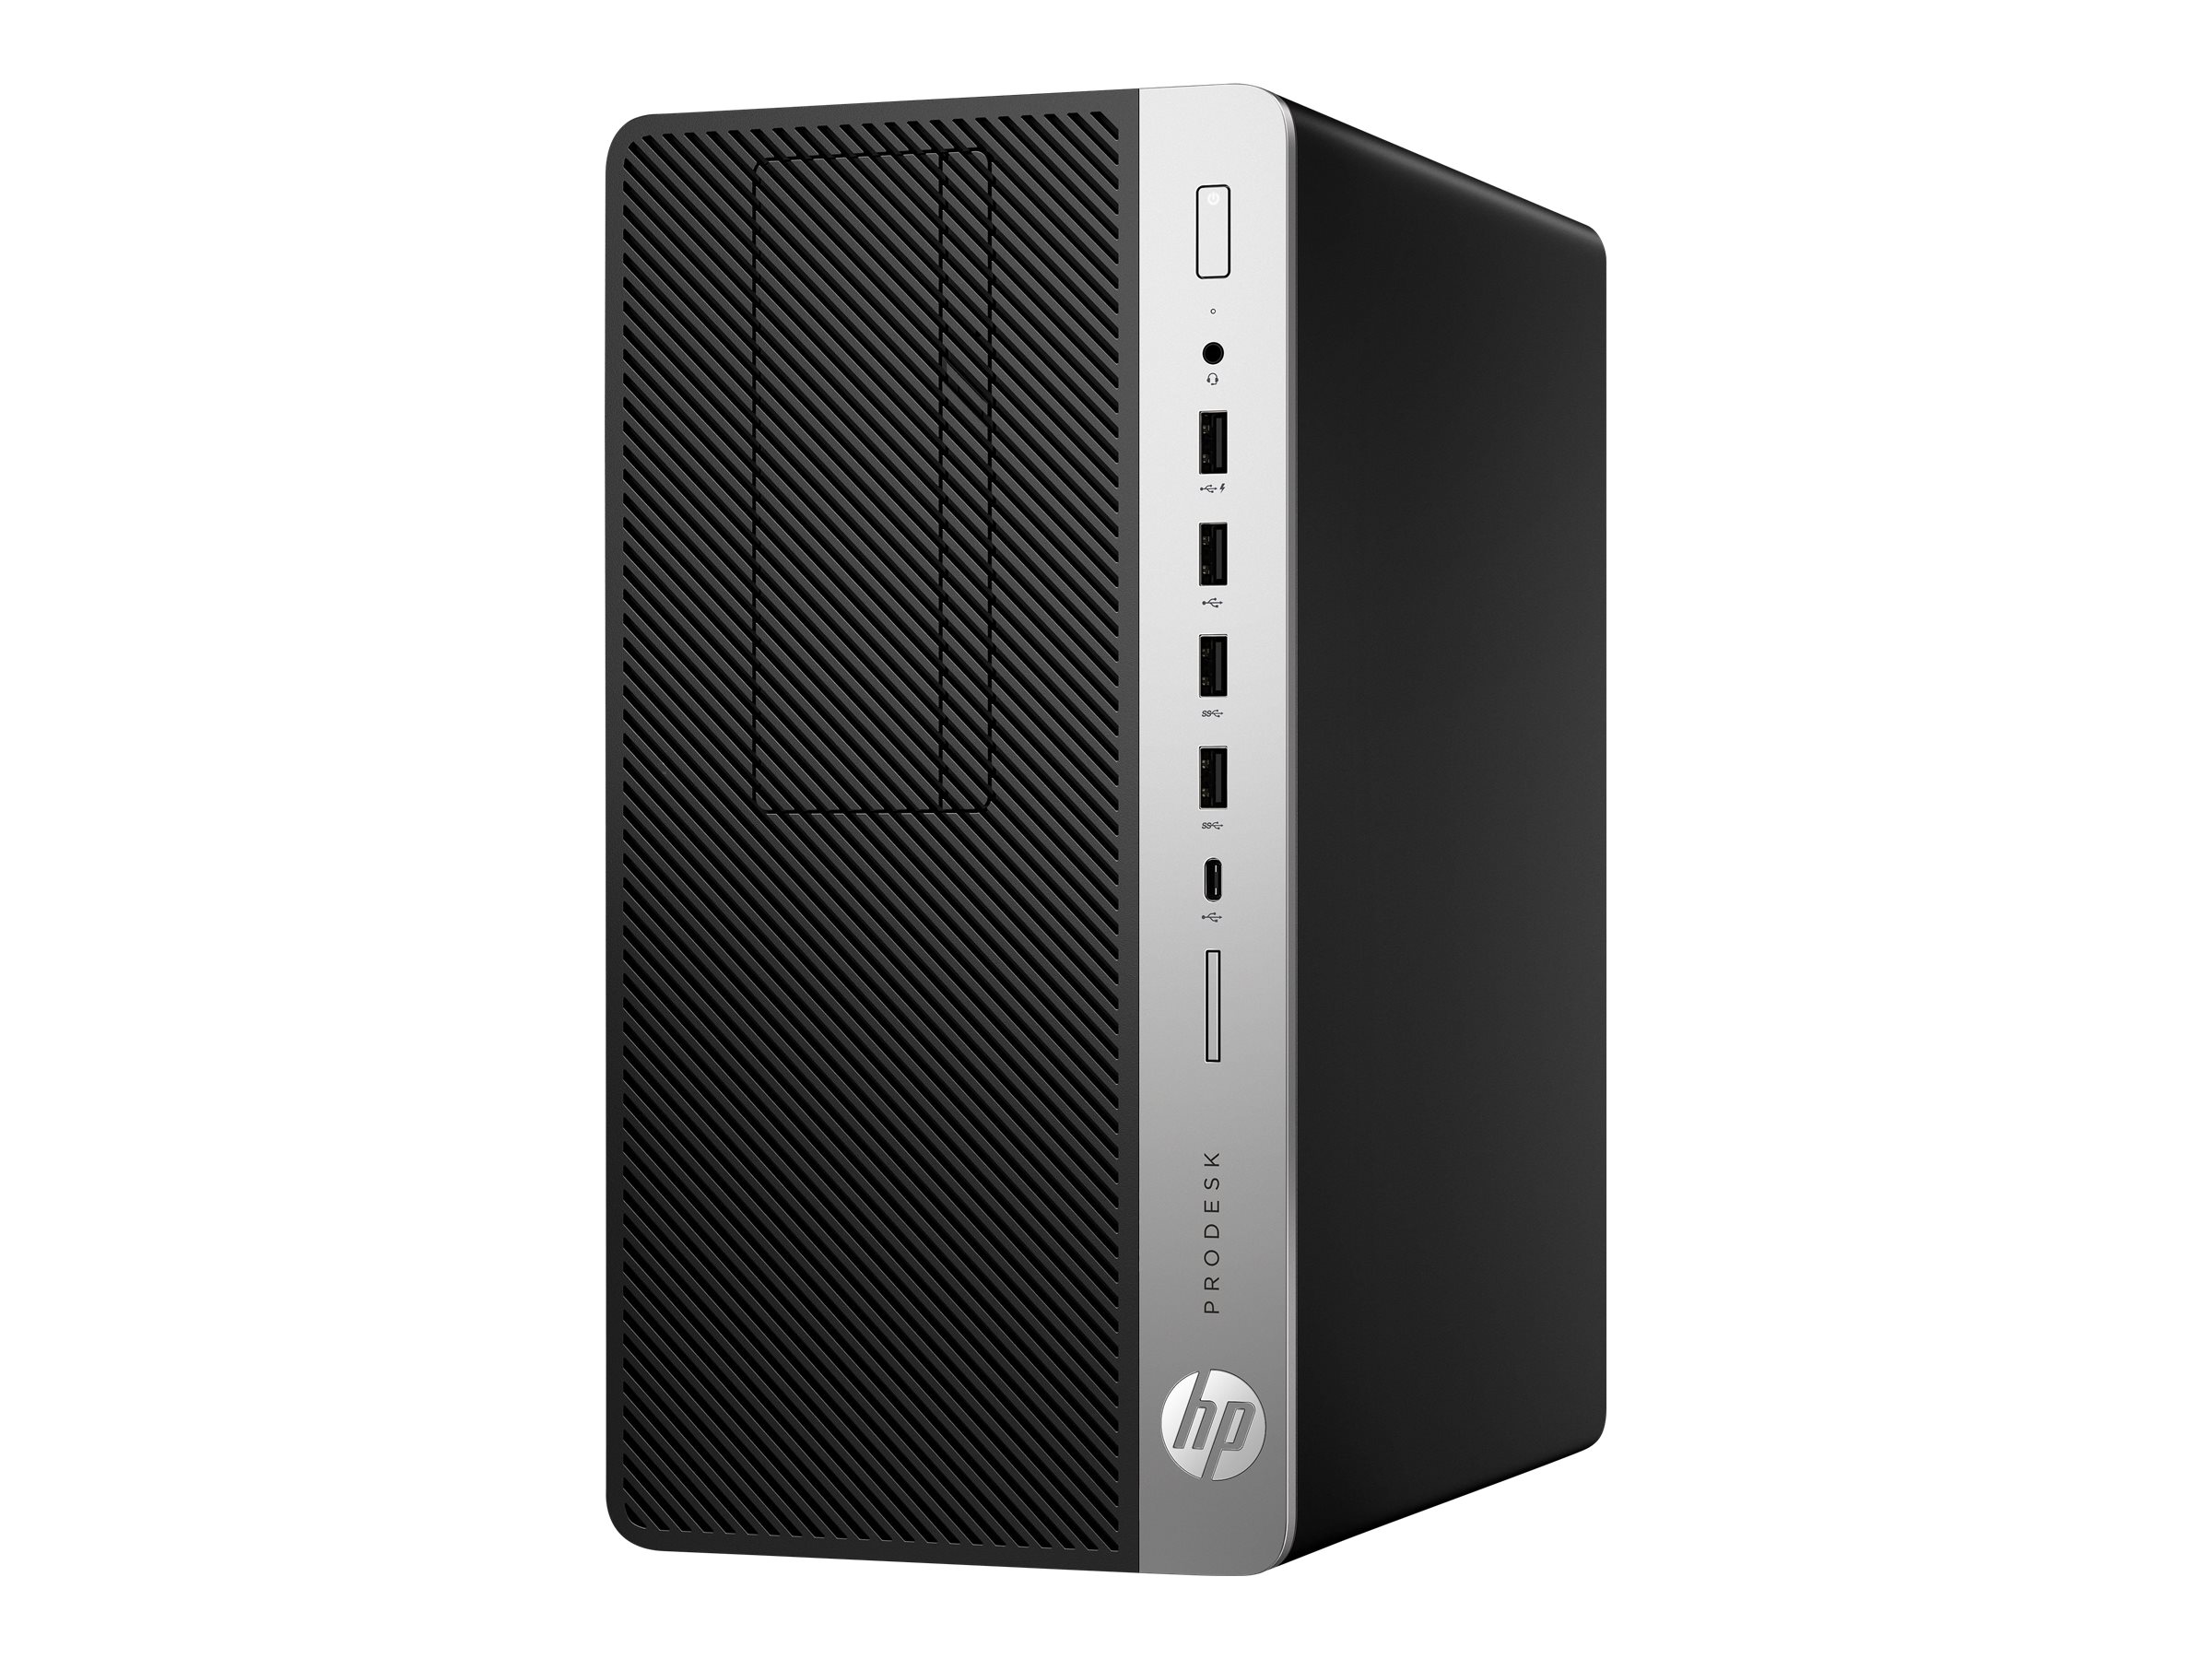 ProDesk 600 G3 Microtower PC (ENERGY STAR)